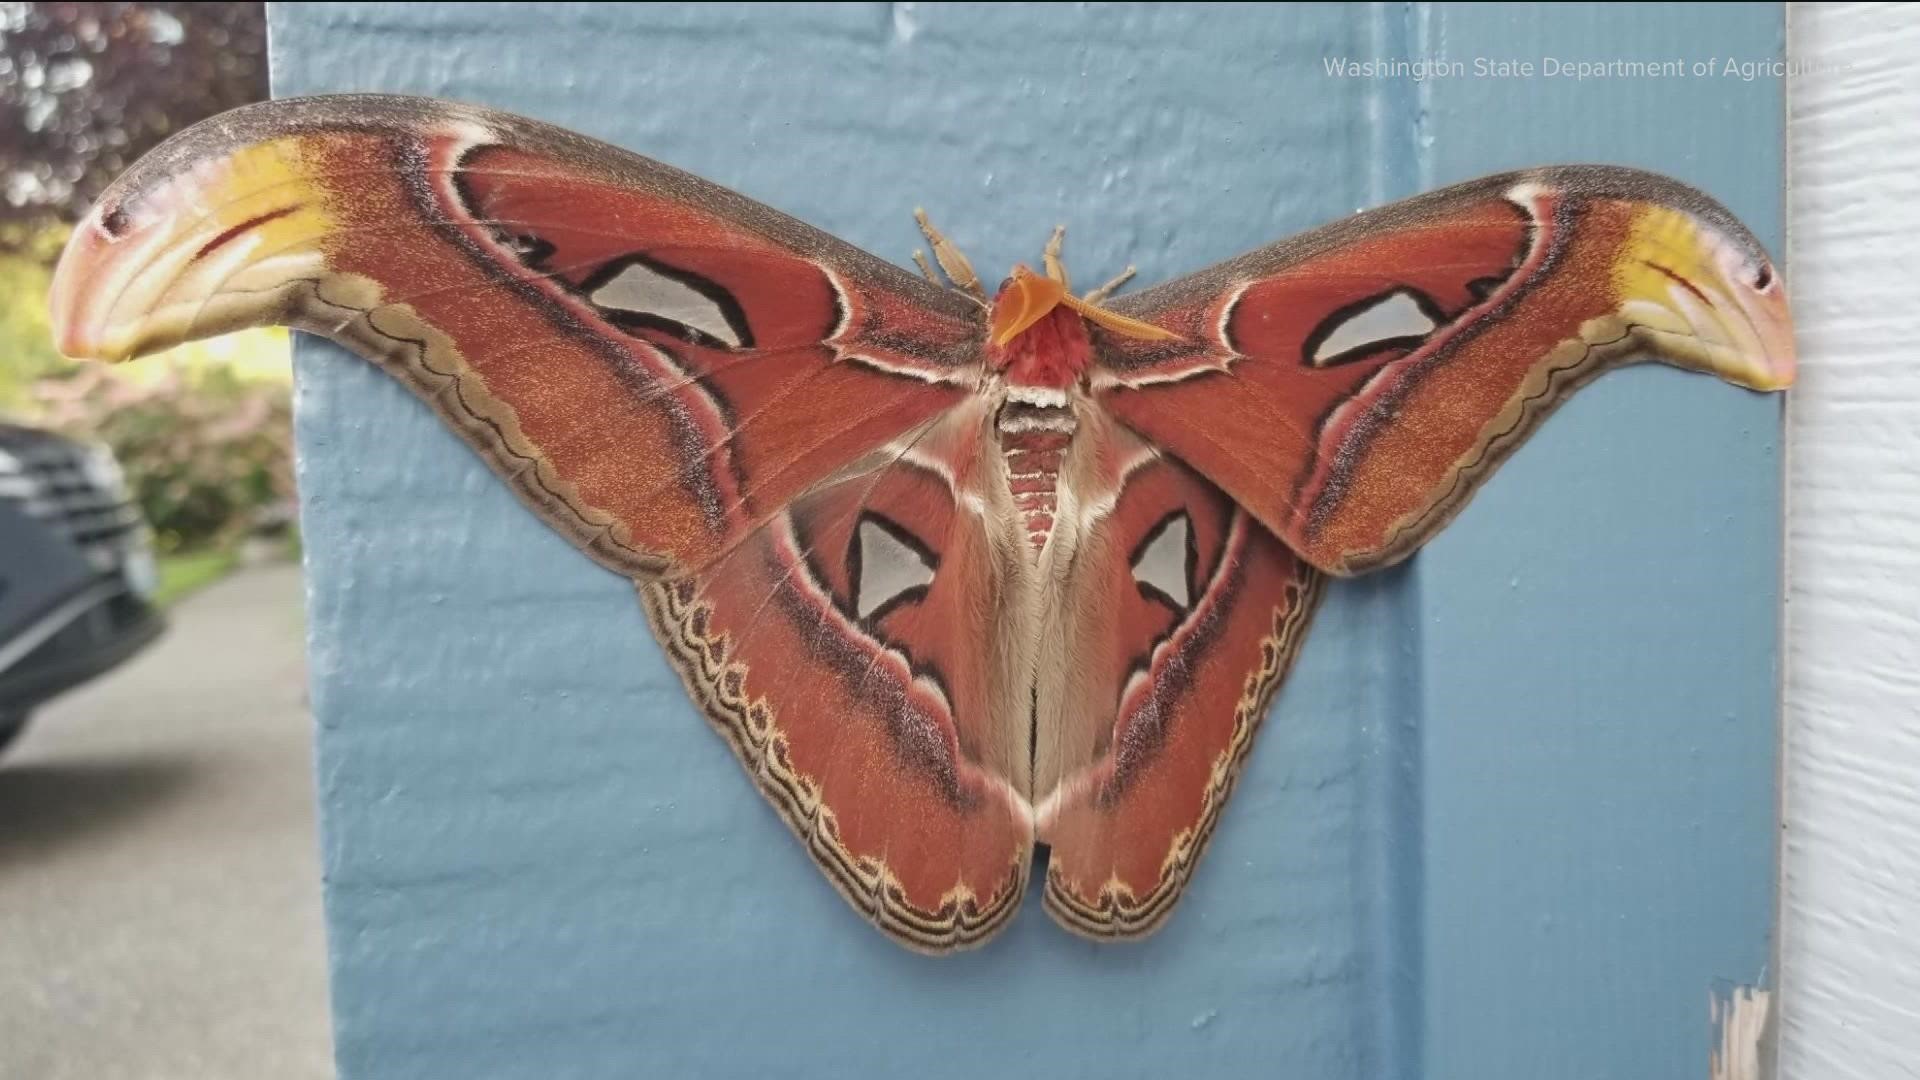 The atlas moth has an average wingspan of 10 inches, but does not pose a public health threat.